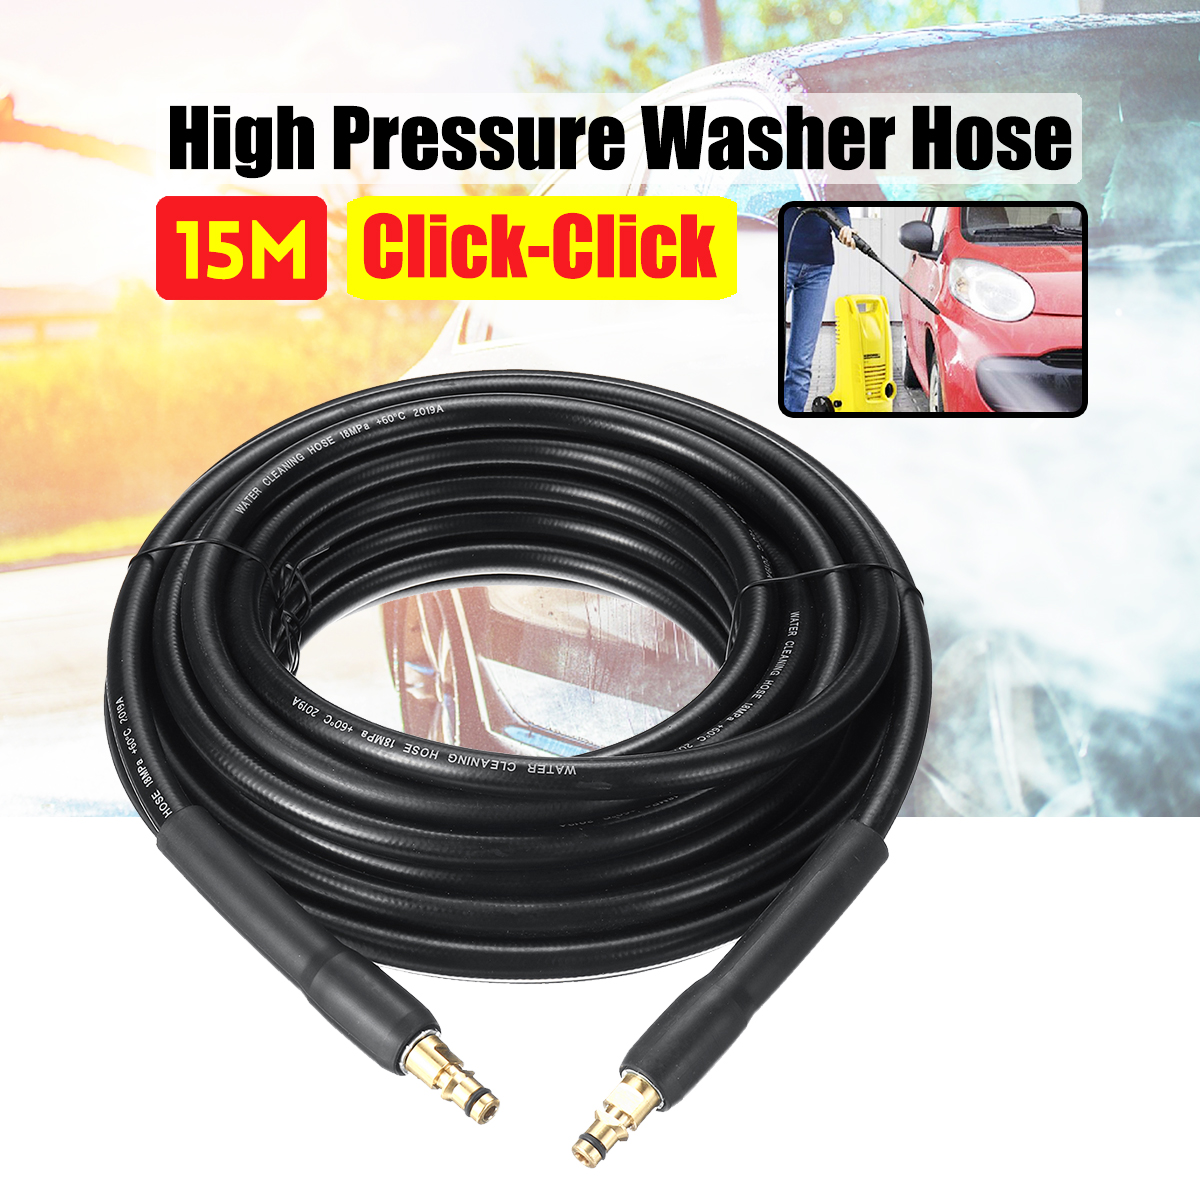 15M-Click-Head-High-Pressure-Washer-Hose-Car-Washer-Water-Cleaning-Hose-for-Karcher-K-Series-1563245-1